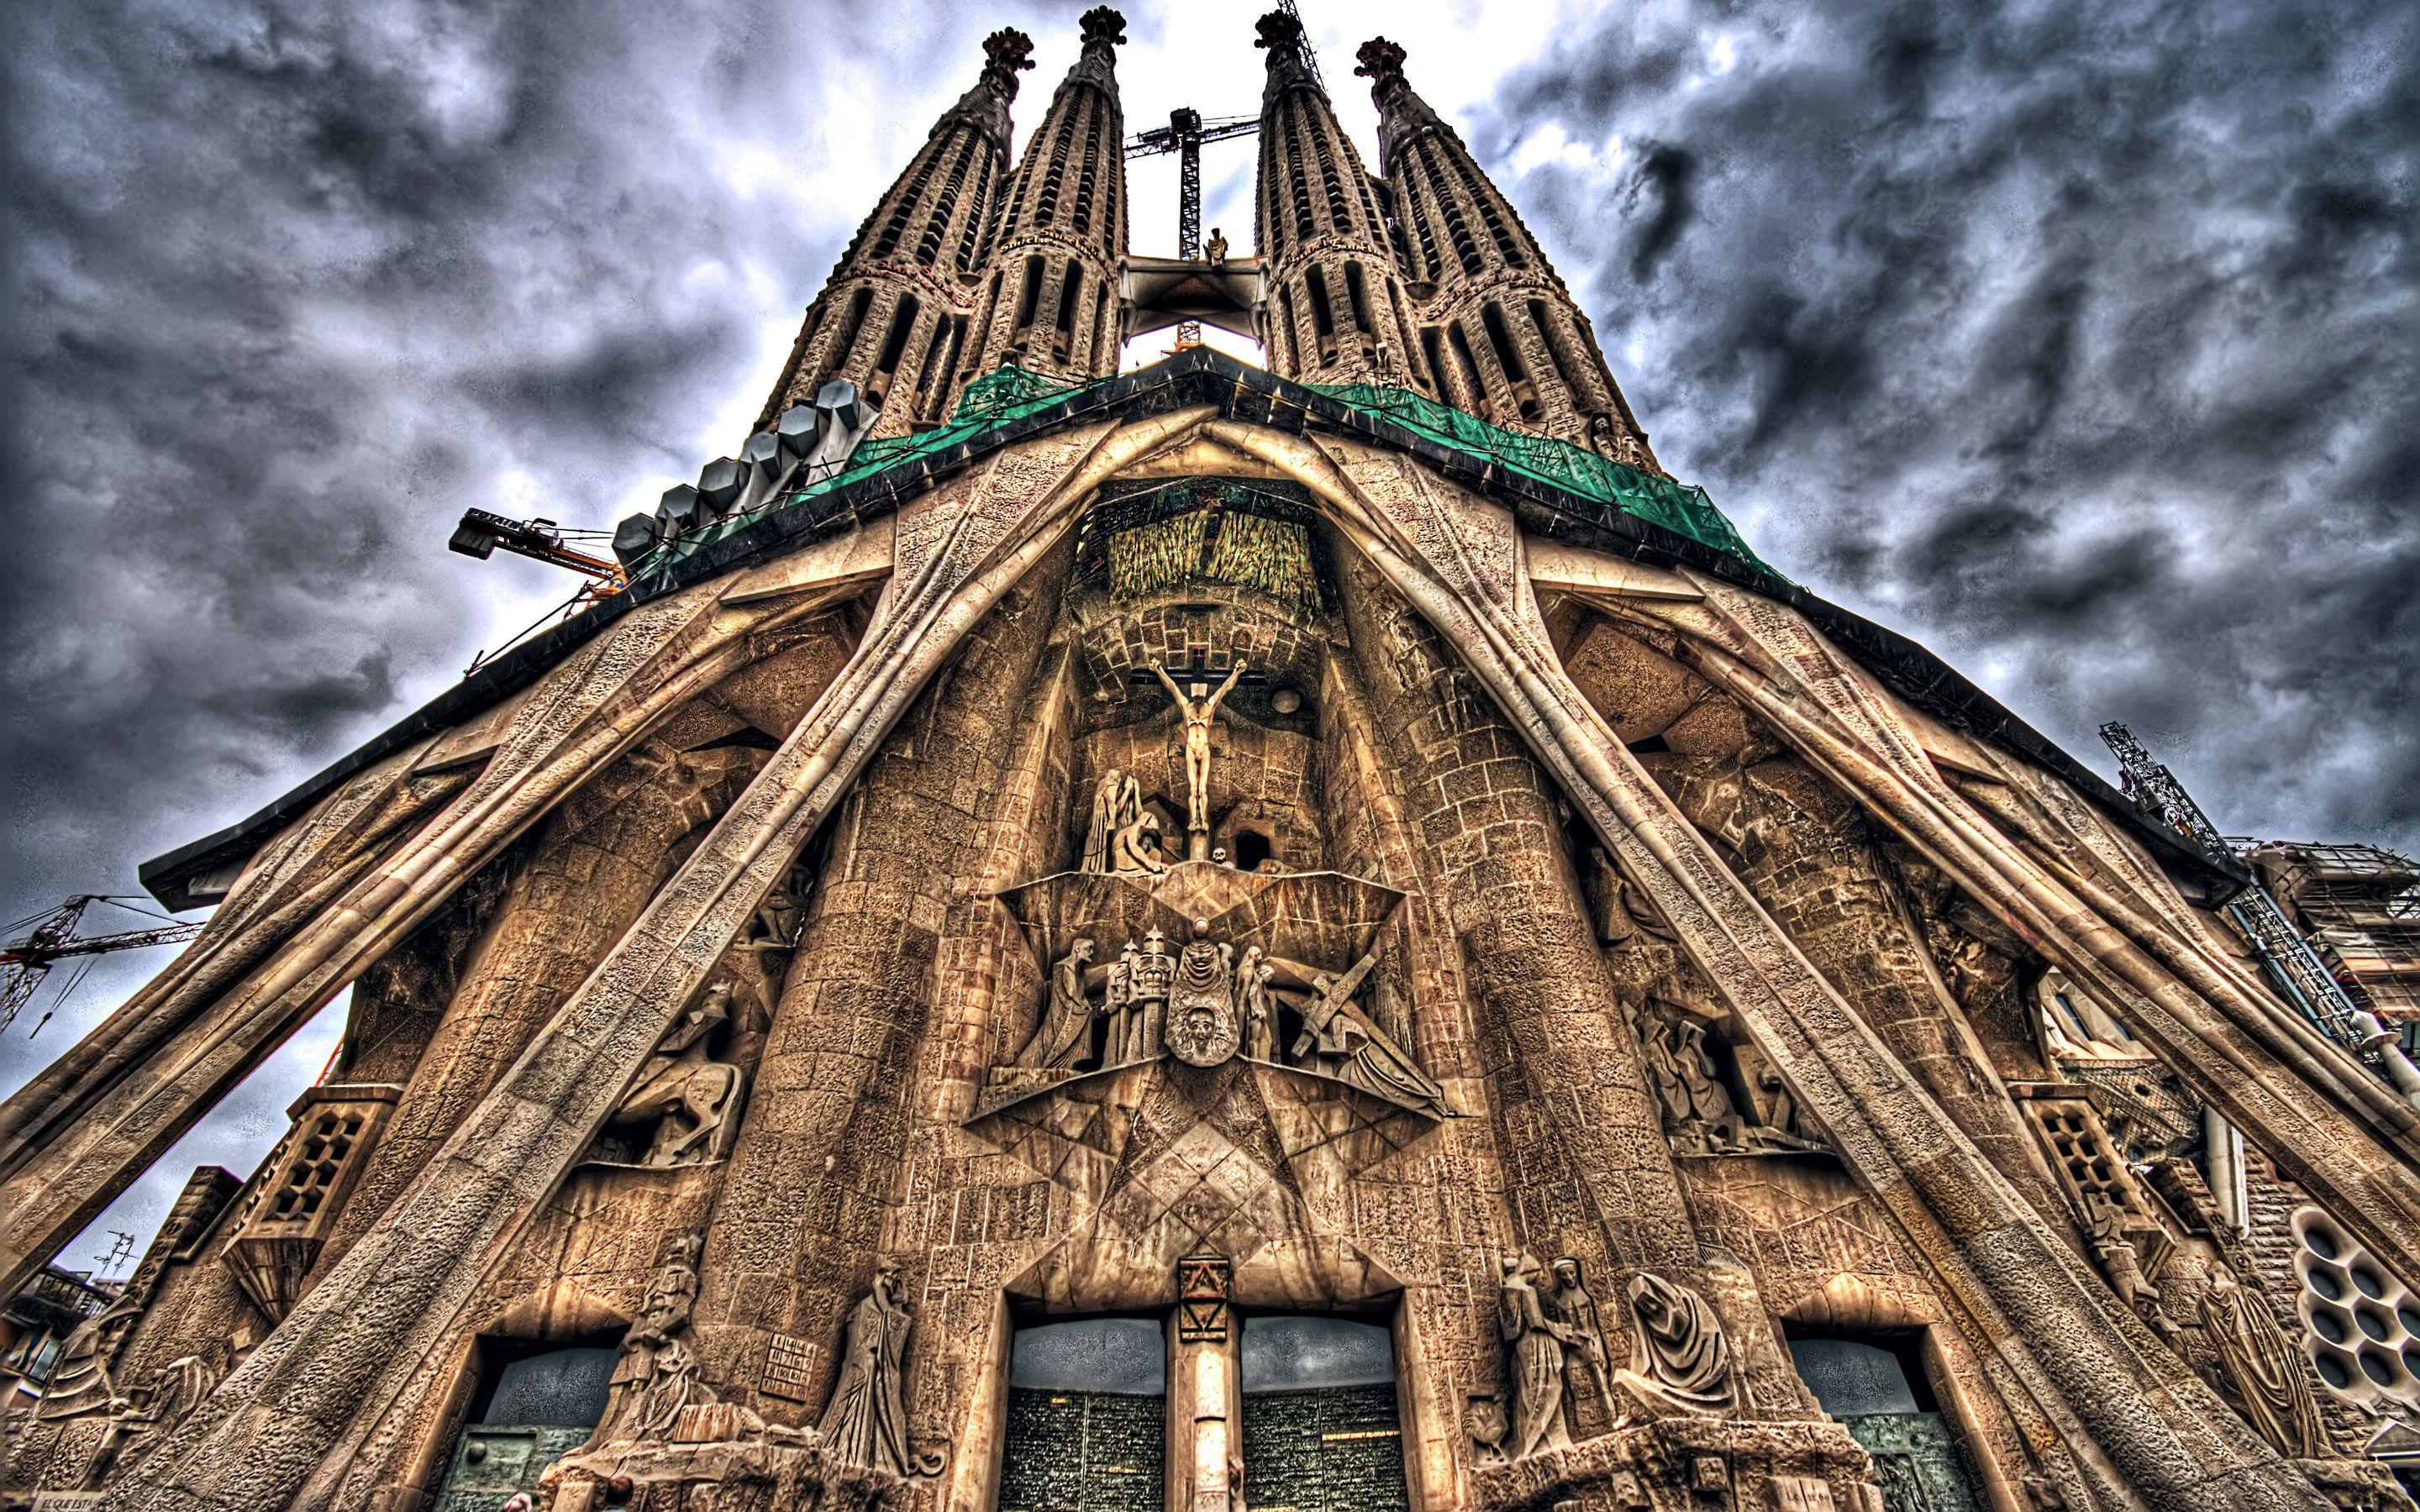 Awesome Barcelona Wallpaper by Jackie Vick on FL. City HDQ.55 MB